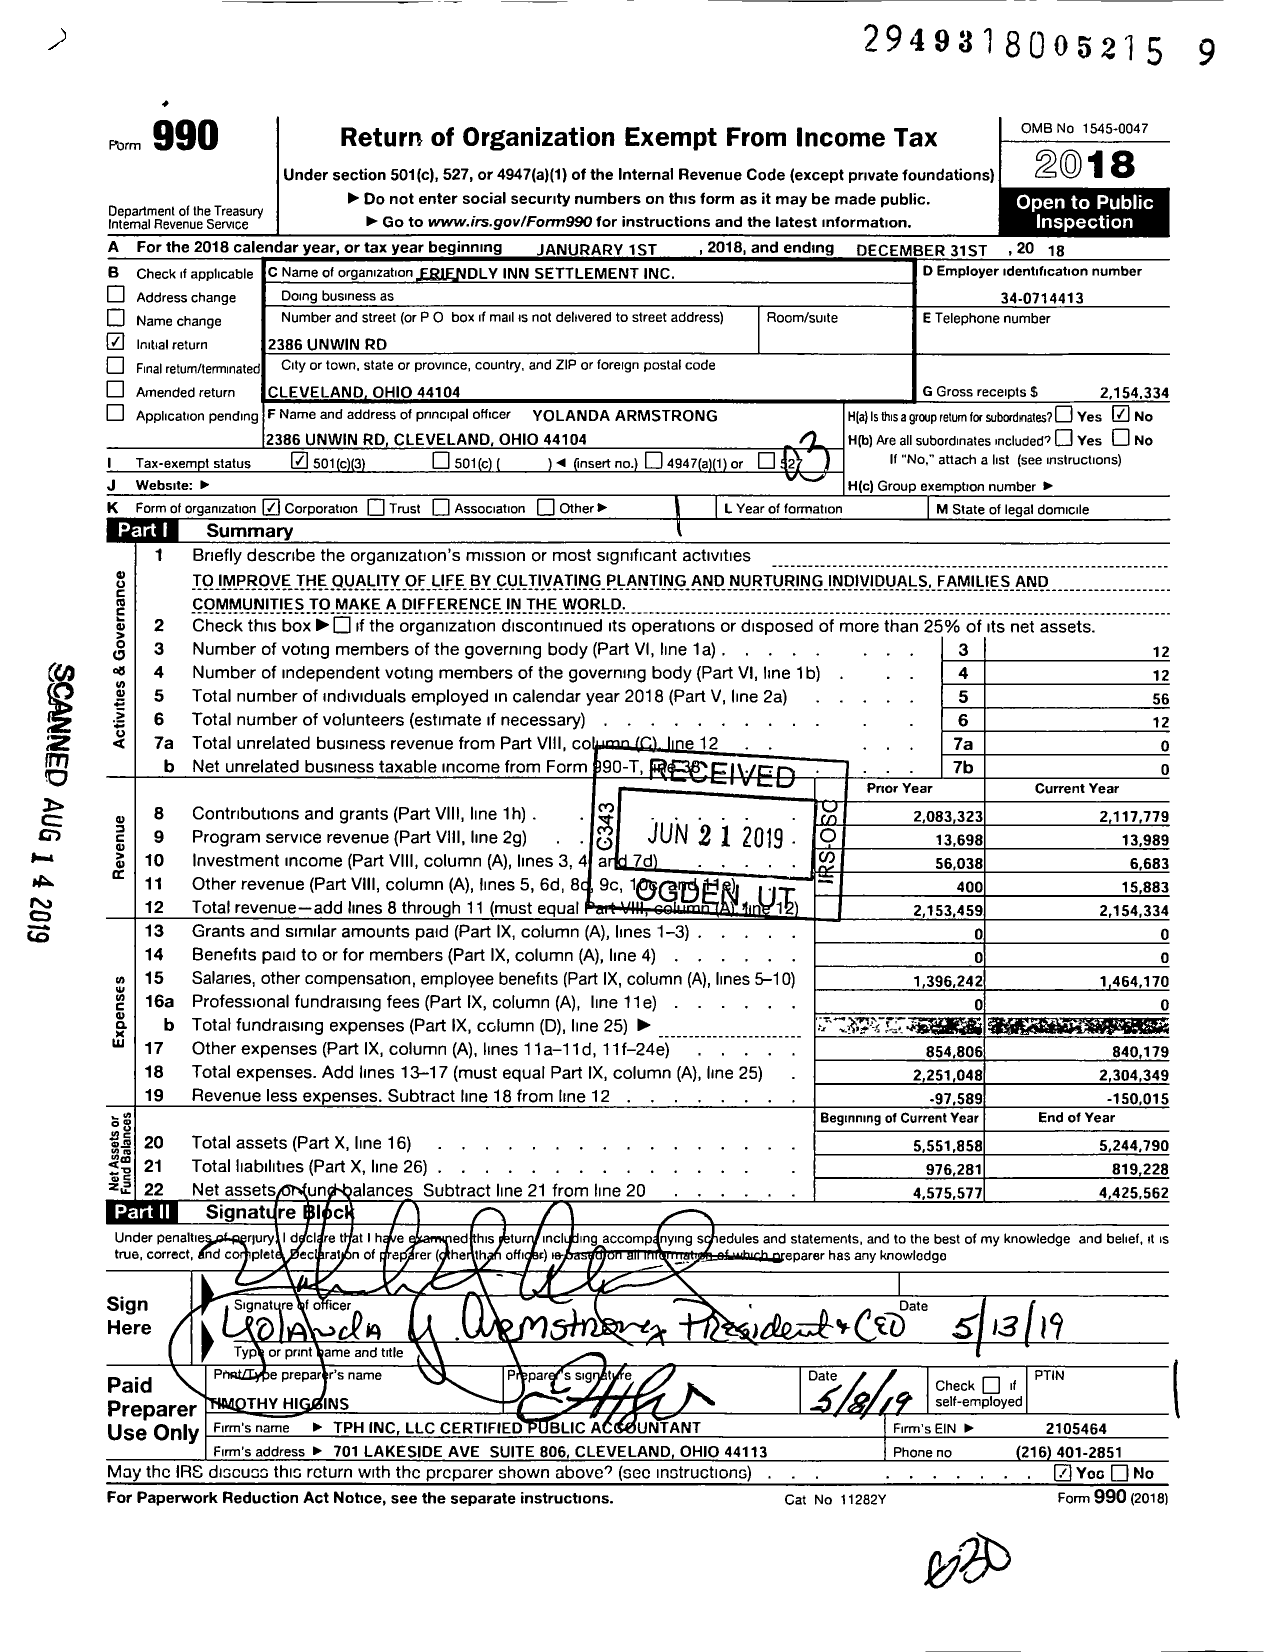 Image of first page of 2018 Form 990 for Friendly Inn Settlement